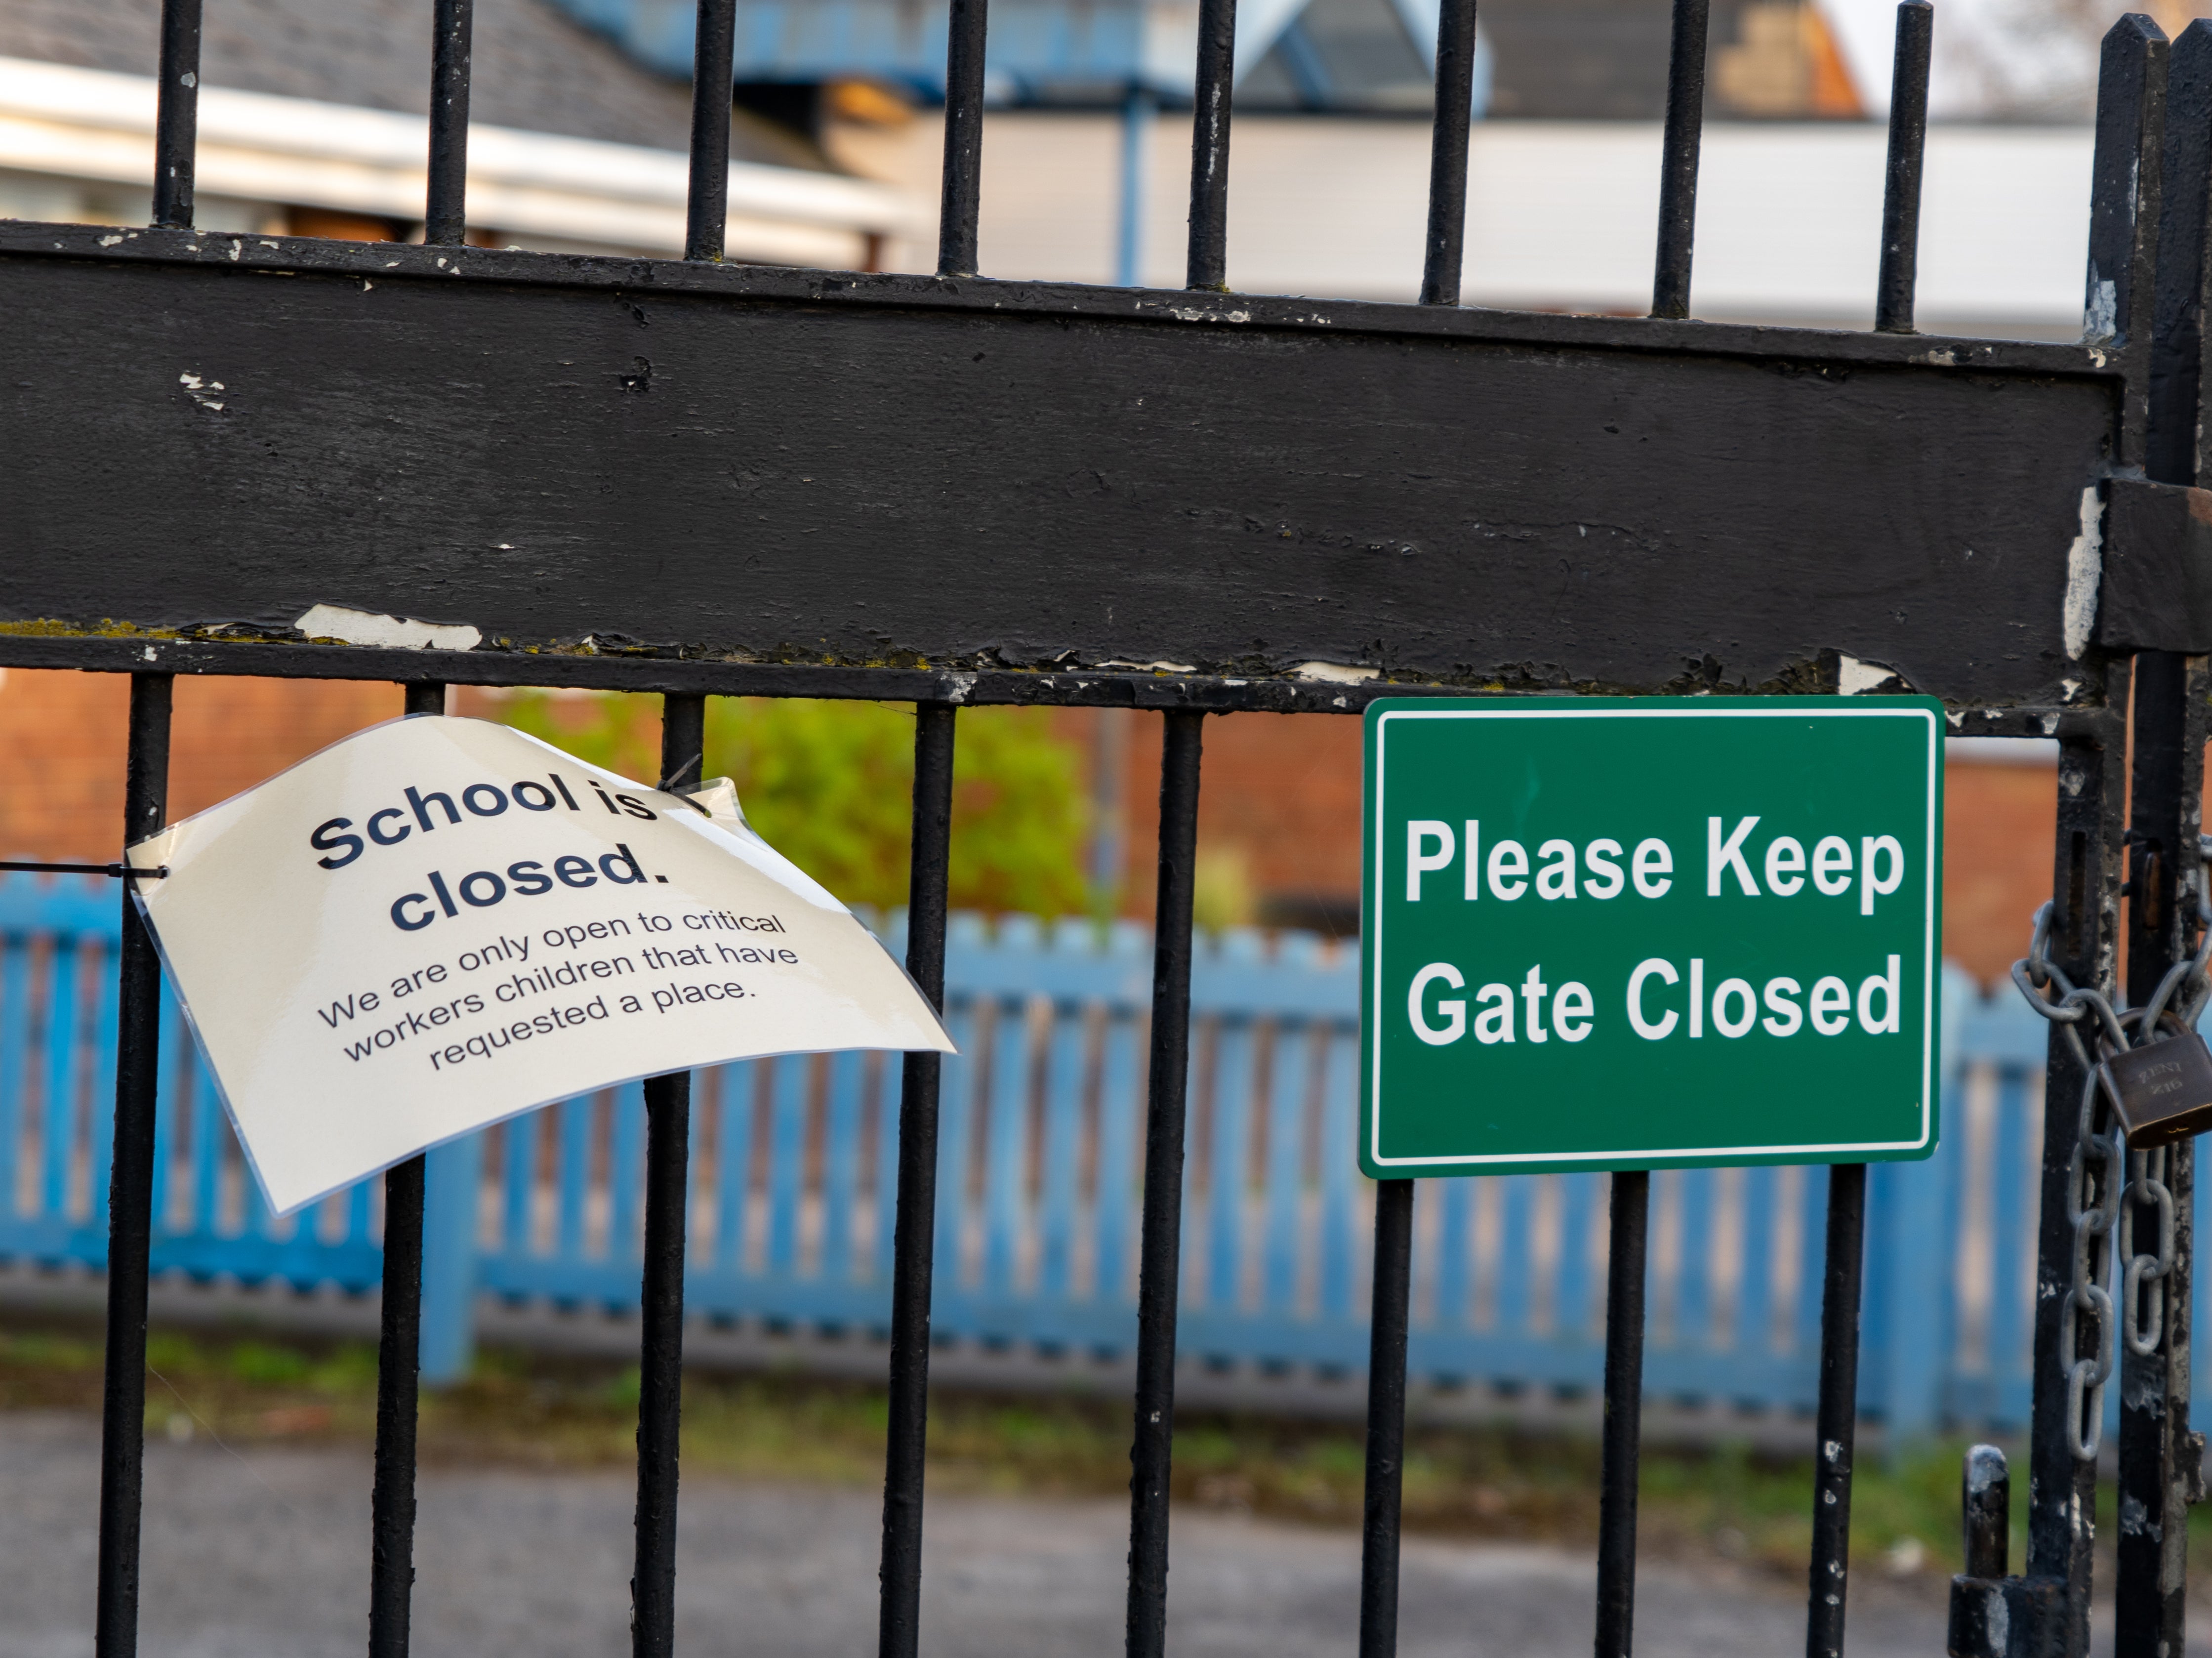 The number of school closures has also increased slightly from the week before, the latest figures show